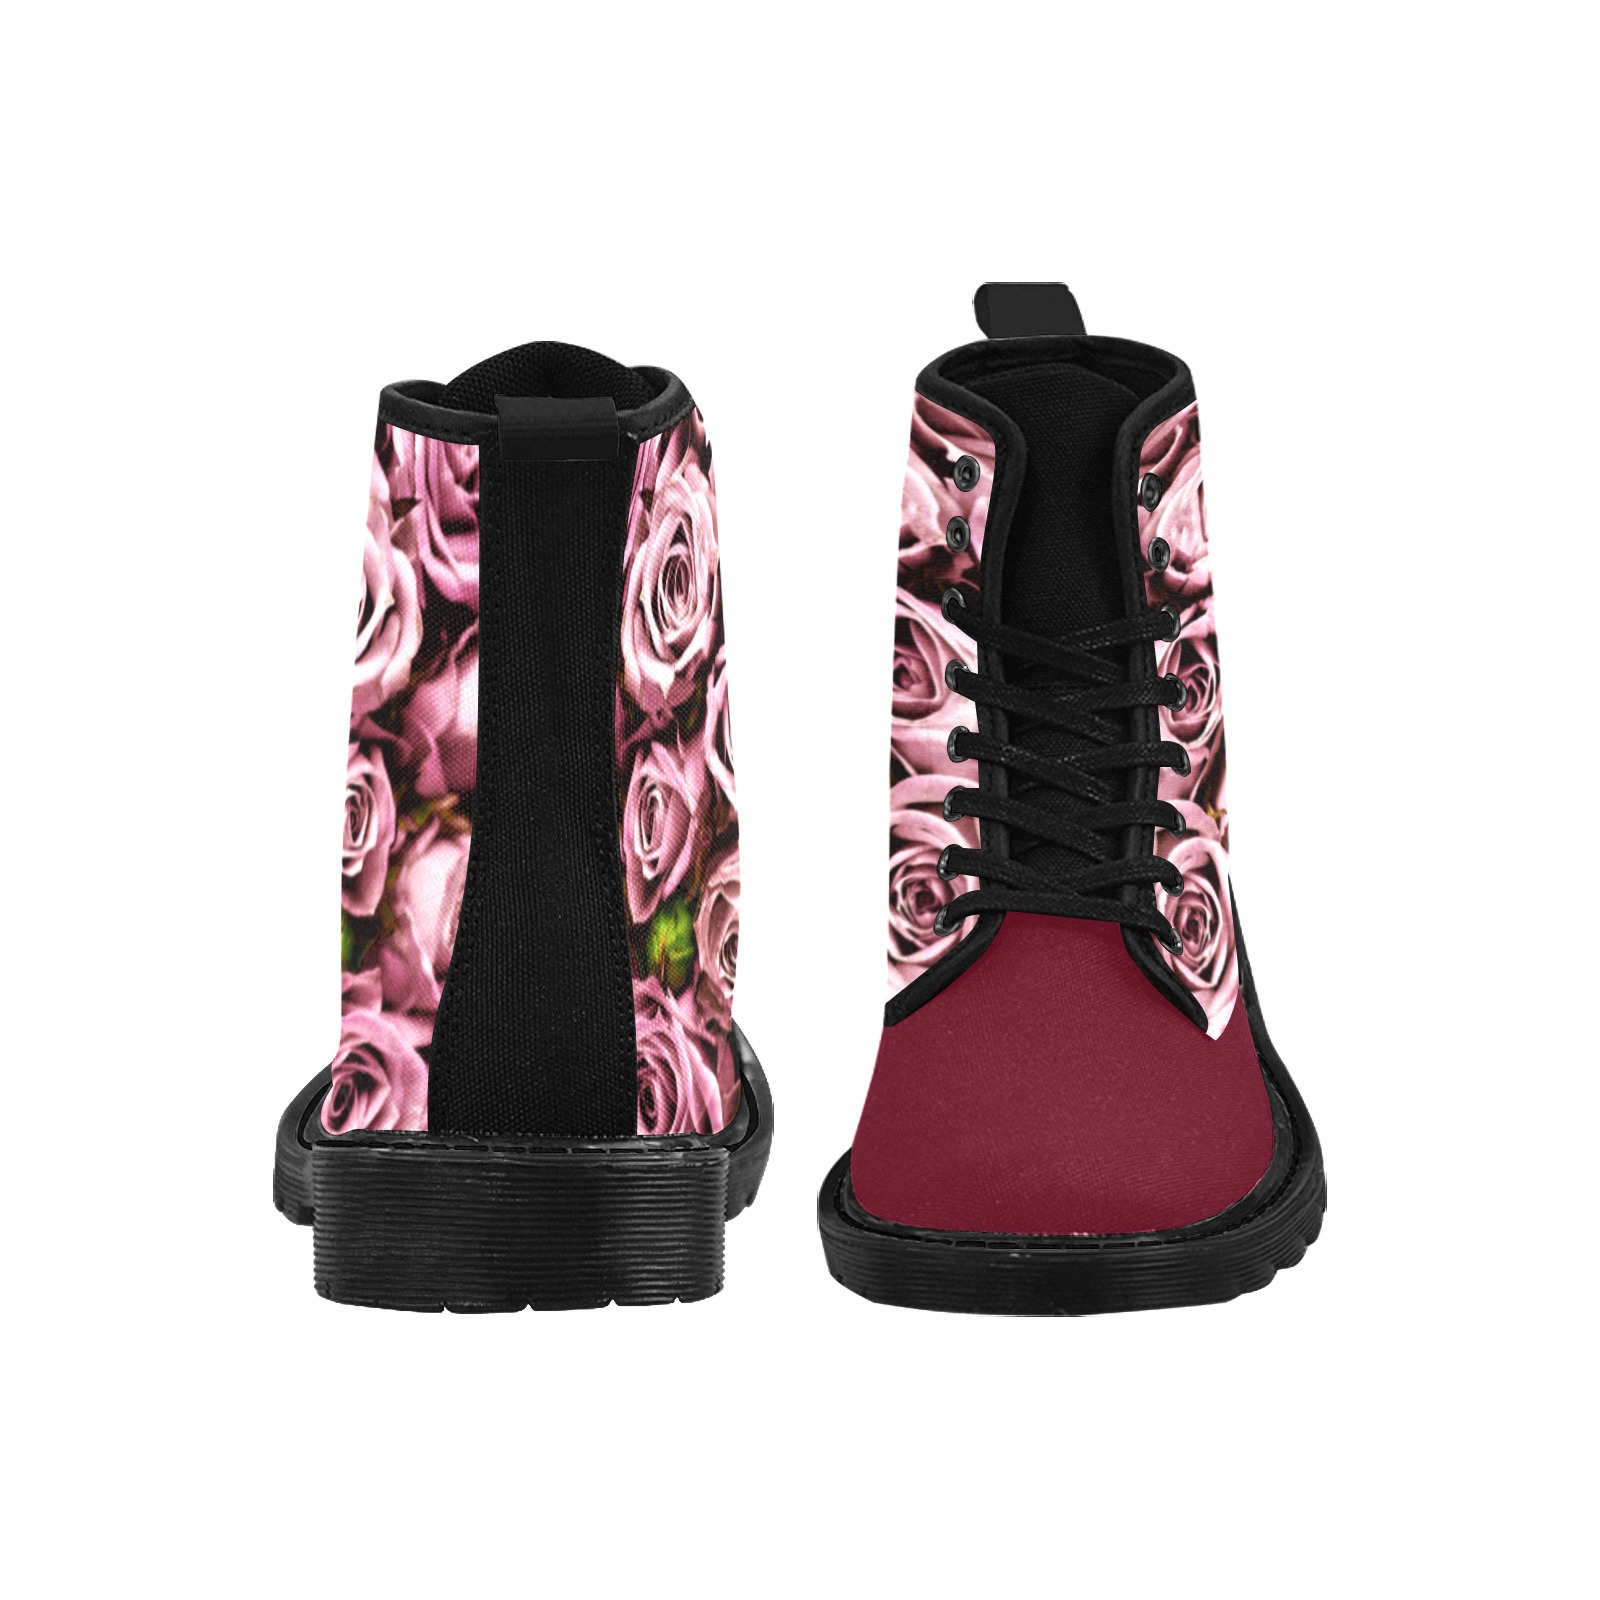 PINK ROSE GARDEN - COLORED TOE Martin Boots for Women (Black) (Model 1203H)